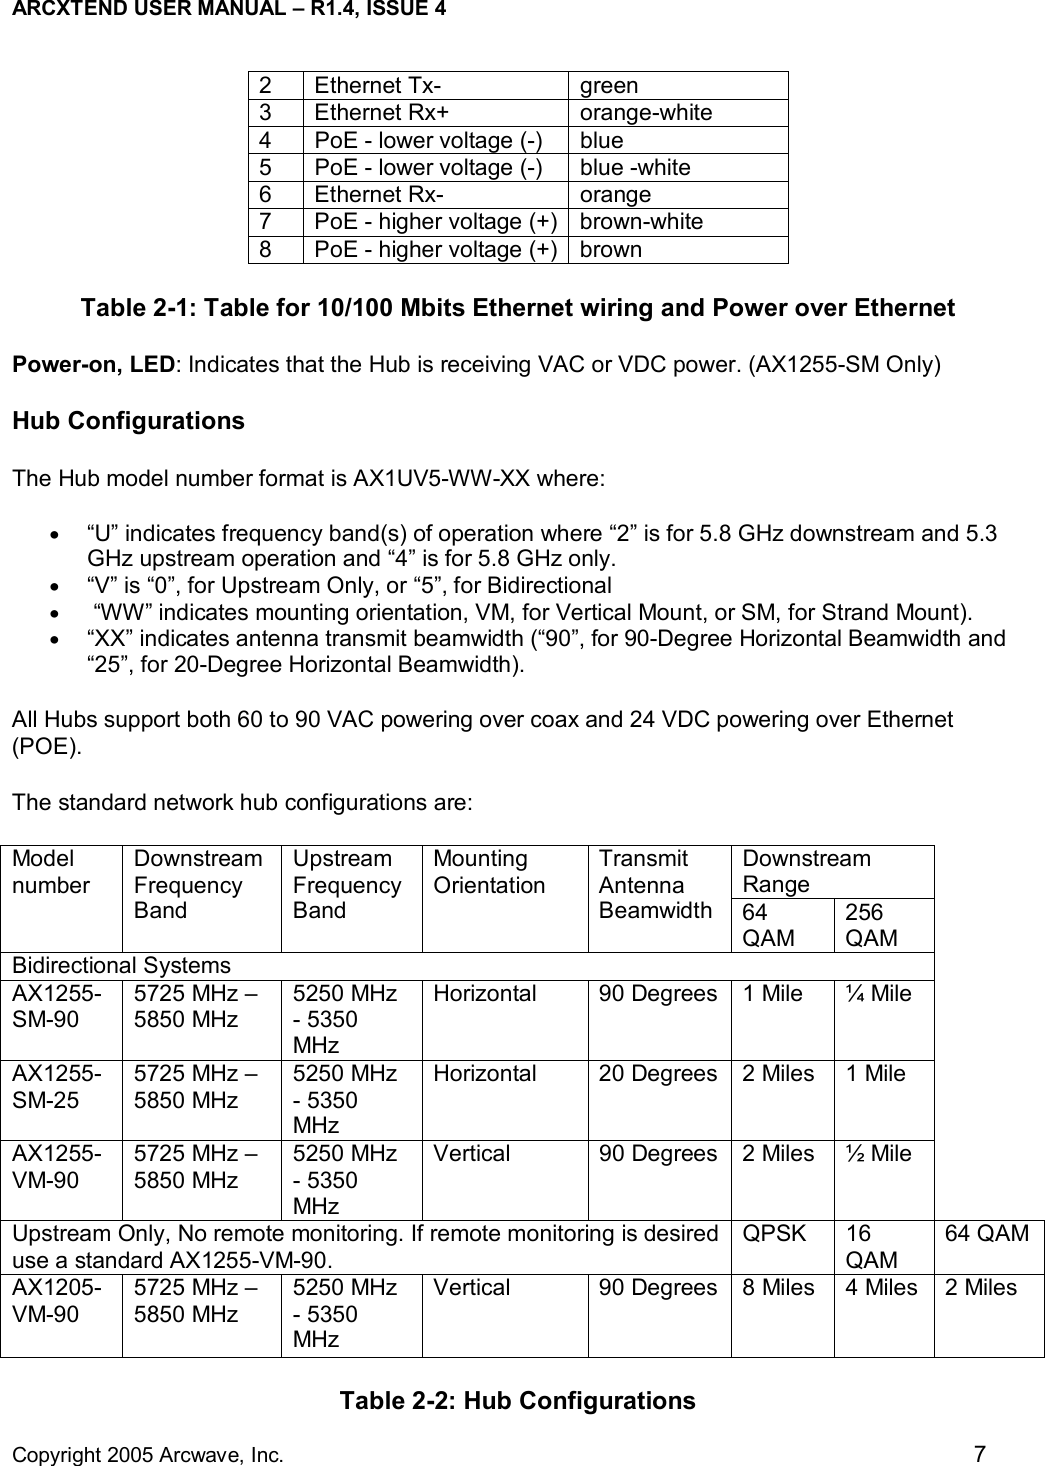 ARCXTEND USER MANUAL – R1.4, ISSUE 4  Copyright 2005 Arcwave, Inc.    7 2   Ethernet Tx-   green  3   Ethernet Rx+   orange-white  4   PoE - lower voltage (-)   blue  5   PoE - lower voltage (-)   blue -white  6   Ethernet Rx-   orange  7   PoE - higher voltage (+)  brown-white  8   PoE - higher voltage (+)  brown  Table 2-1: Table for 10/100 Mbits Ethernet wiring and Power over Ethernet Power-on, LED: Indicates that the Hub is receiving VAC or VDC power. (AX1255-SM Only) Hub Configurations The Hub model number format is AX1UV5-WW-XX where: •  “U” indicates frequency band(s) of operation where “2” is for 5.8 GHz downstream and 5.3 GHz upstream operation and “4” is for 5.8 GHz only. •  “V” is “0”, for Upstream Only, or “5”, for Bidirectional •   “WW” indicates mounting orientation, VM, for Vertical Mount, or SM, for Strand Mount).  •  “XX” indicates antenna transmit beamwidth (“90”, for 90-Degree Horizontal Beamwidth and “25”, for 20-Degree Horizontal Beamwidth). All Hubs support both 60 to 90 VAC powering over coax and 24 VDC powering over Ethernet (POE).  The standard network hub configurations are: Downstream Range Model number Downstream Frequency Band Upstream Frequency Band Mounting Orientation Transmit Antenna Beamwidth  64 QAM 256 QAM Bidirectional Systems AX1255-SM-90 5725 MHz – 5850 MHz 5250 MHz - 5350 MHz Horizontal  90 Degrees  1 Mile  ¼ Mile AX1255-SM-25 5725 MHz – 5850 MHz 5250 MHz - 5350 MHz Horizontal  20 Degrees  2 Miles  1 Mile AX1255-VM-90 5725 MHz – 5850 MHz 5250 MHz - 5350 MHz Vertical  90 Degrees  2 Miles  ½ Mile Upstream Only, No remote monitoring. If remote monitoring is desired use a standard AX1255-VM-90. QPSK 16 QAM 64 QAM AX1205-VM-90 5725 MHz – 5850 MHz 5250 MHz - 5350 MHz Vertical  90 Degrees  8 Miles  4 Miles  2 Miles Table 2-2: Hub Configurations 